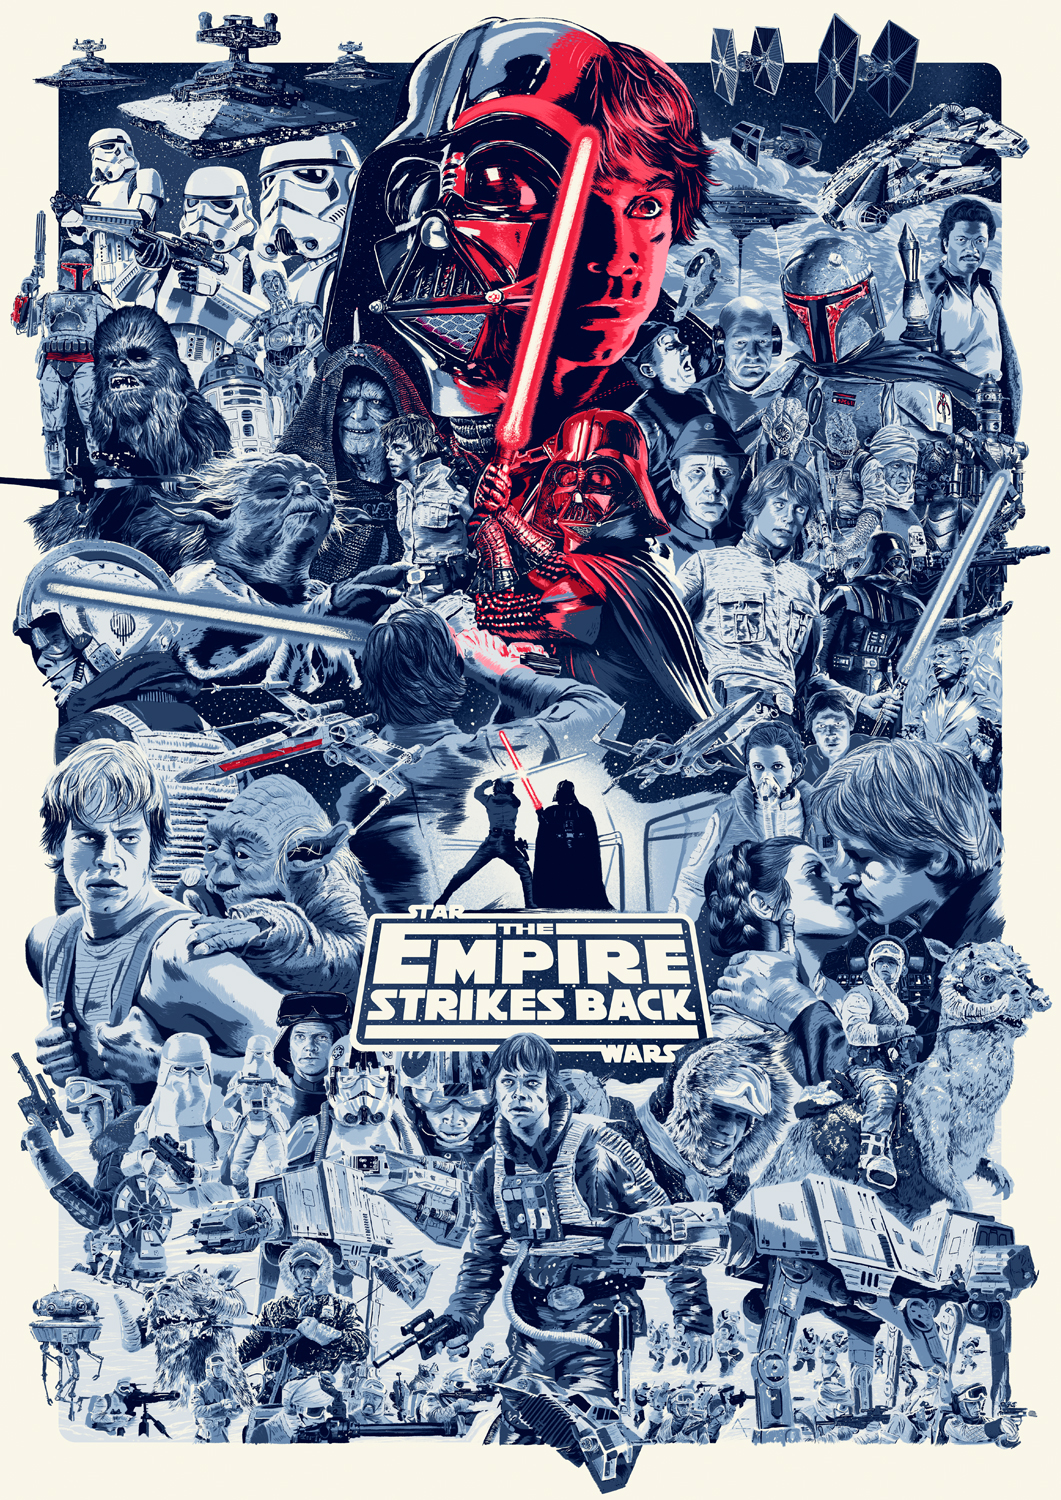 Star Wars . The Empire Strikes Back